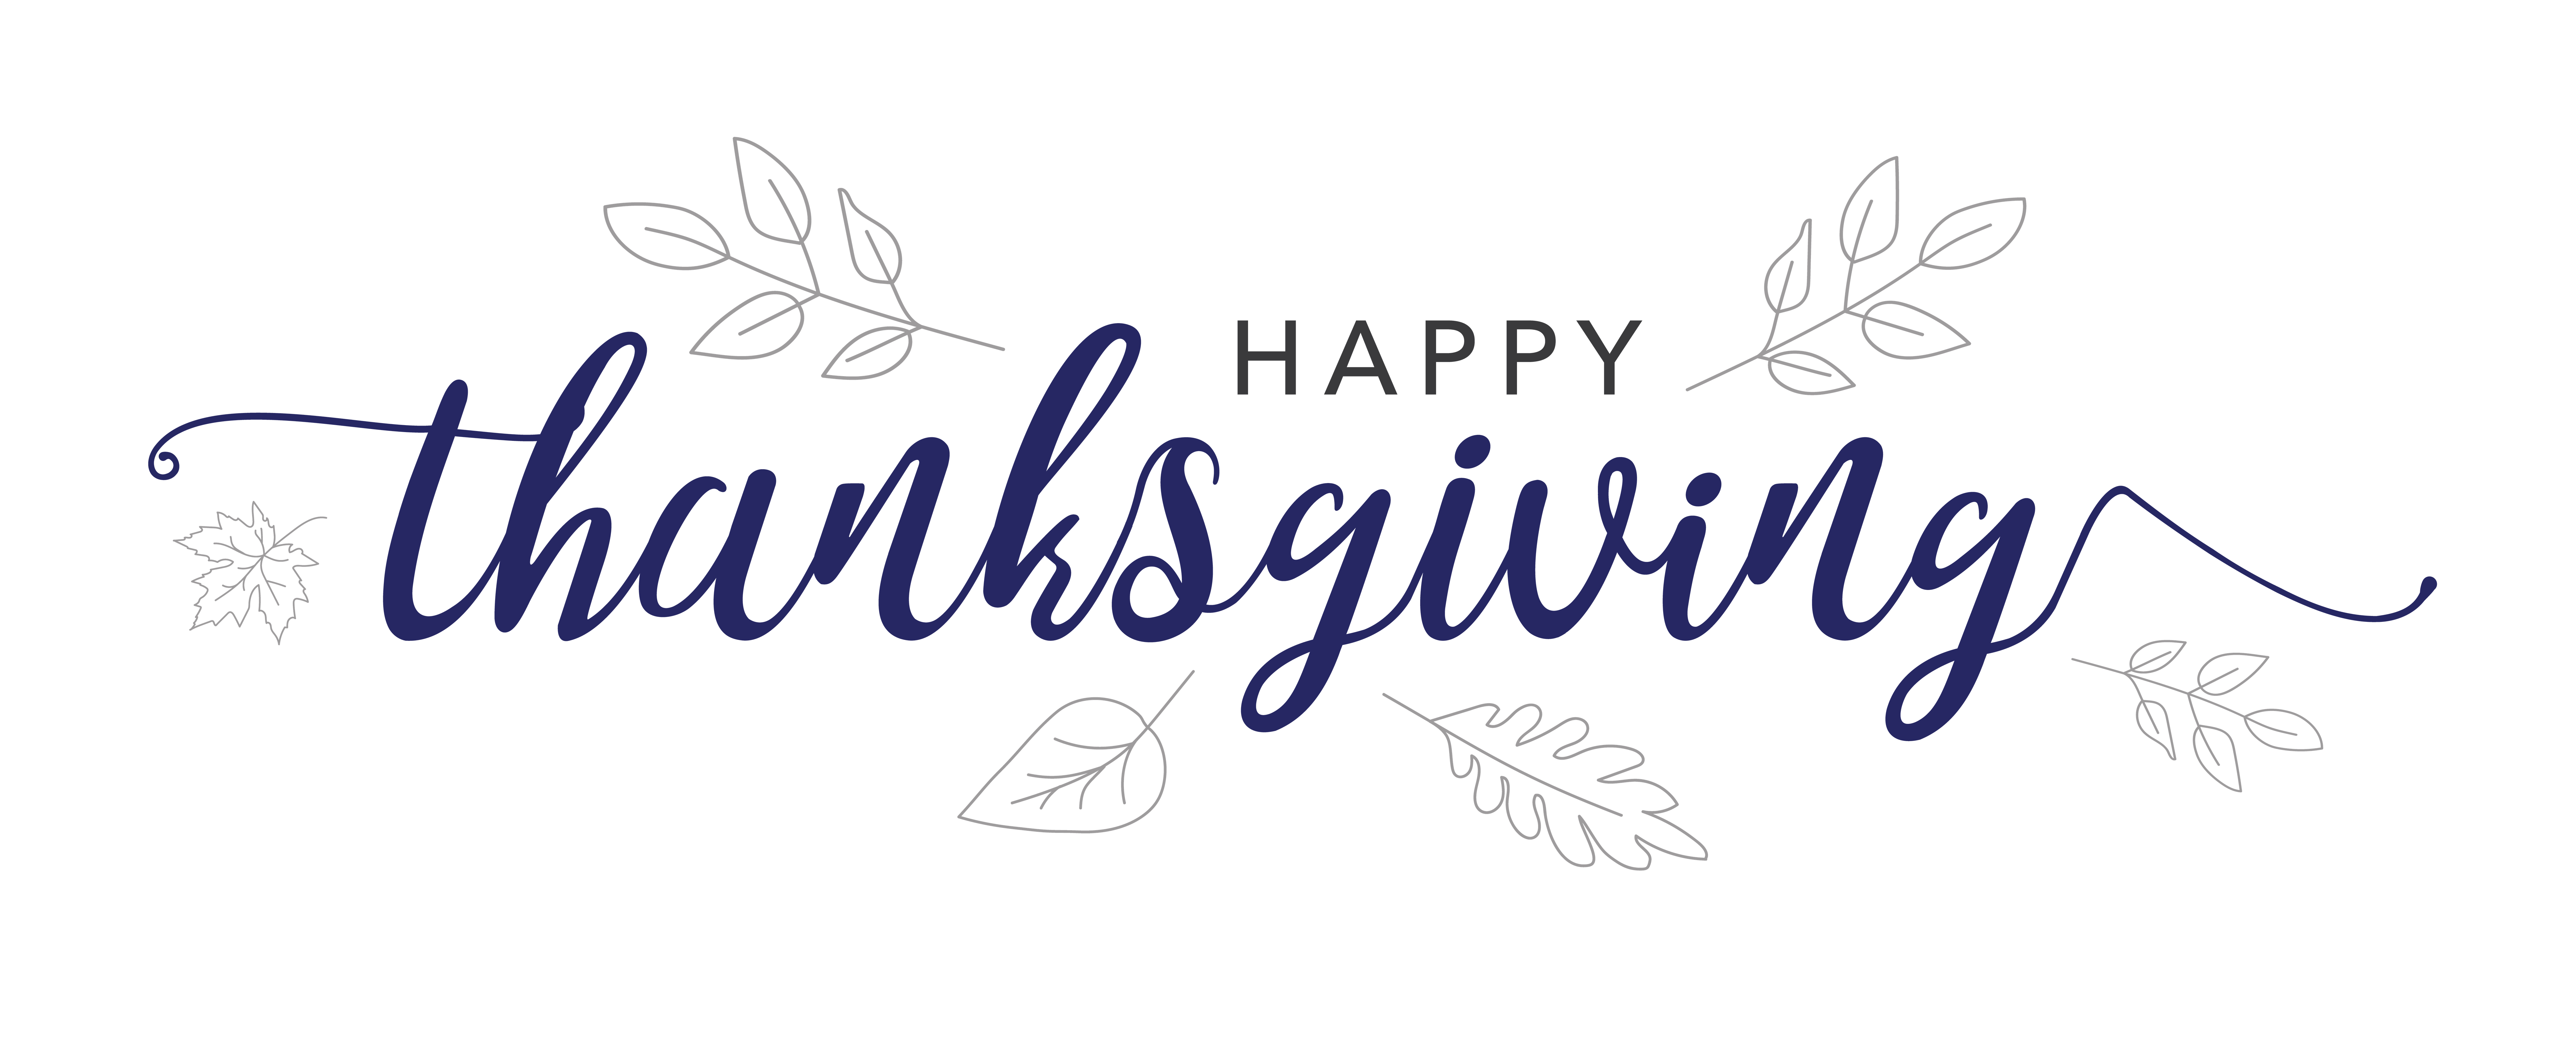 thanksgiving type_shutterstock_743717227 [Converted]-01